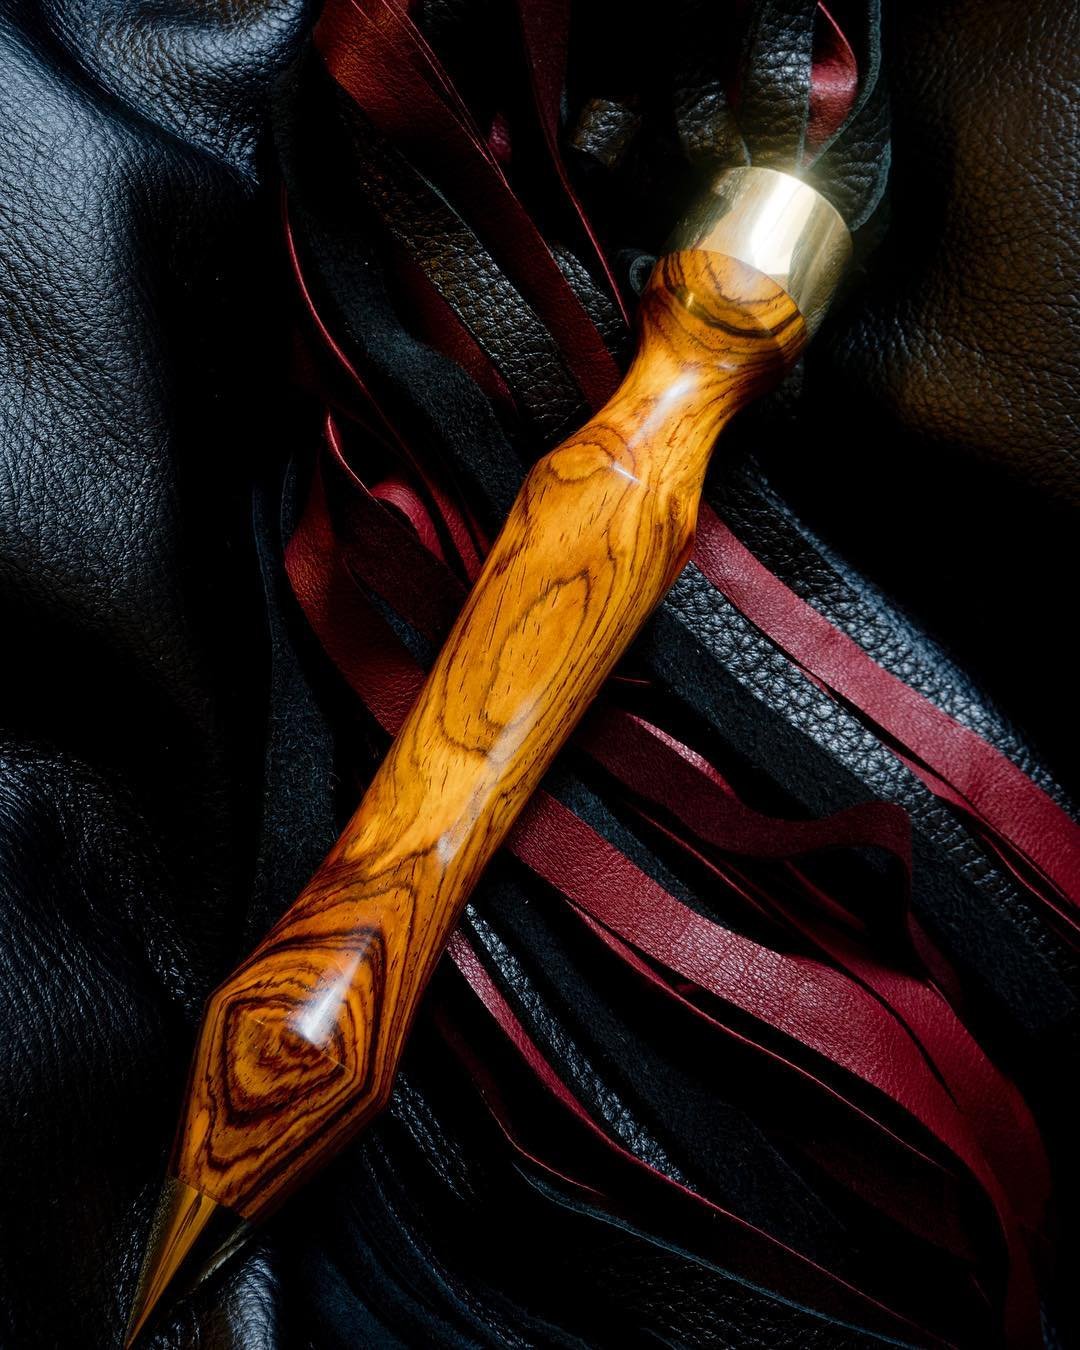 Strikingly bright cocobolo from our private reserve paired with redwood and black deer leather